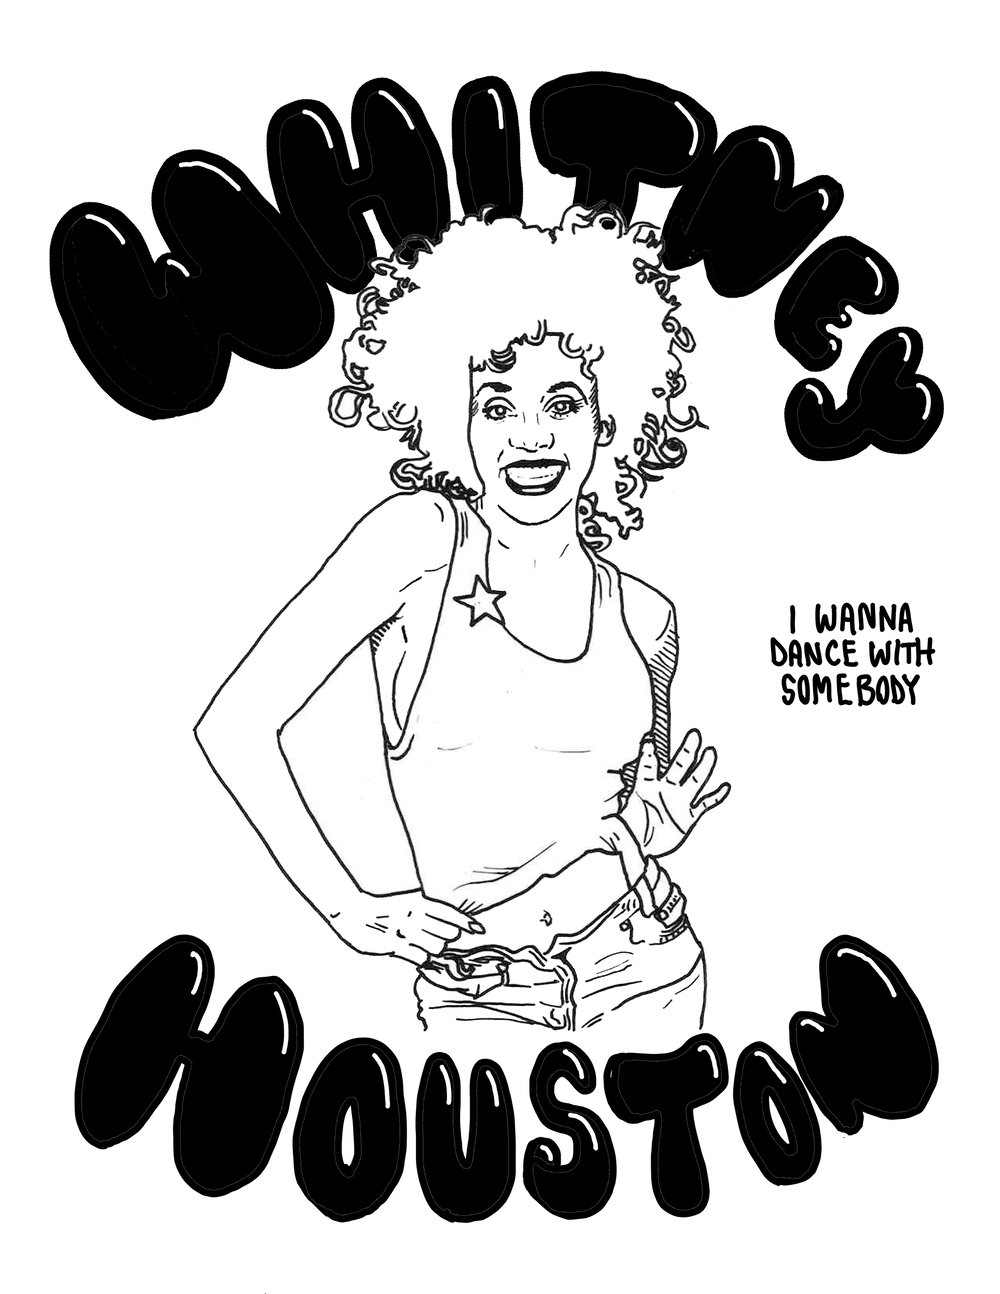 Image of Influential Women of Music Coloring Book Vol. 1